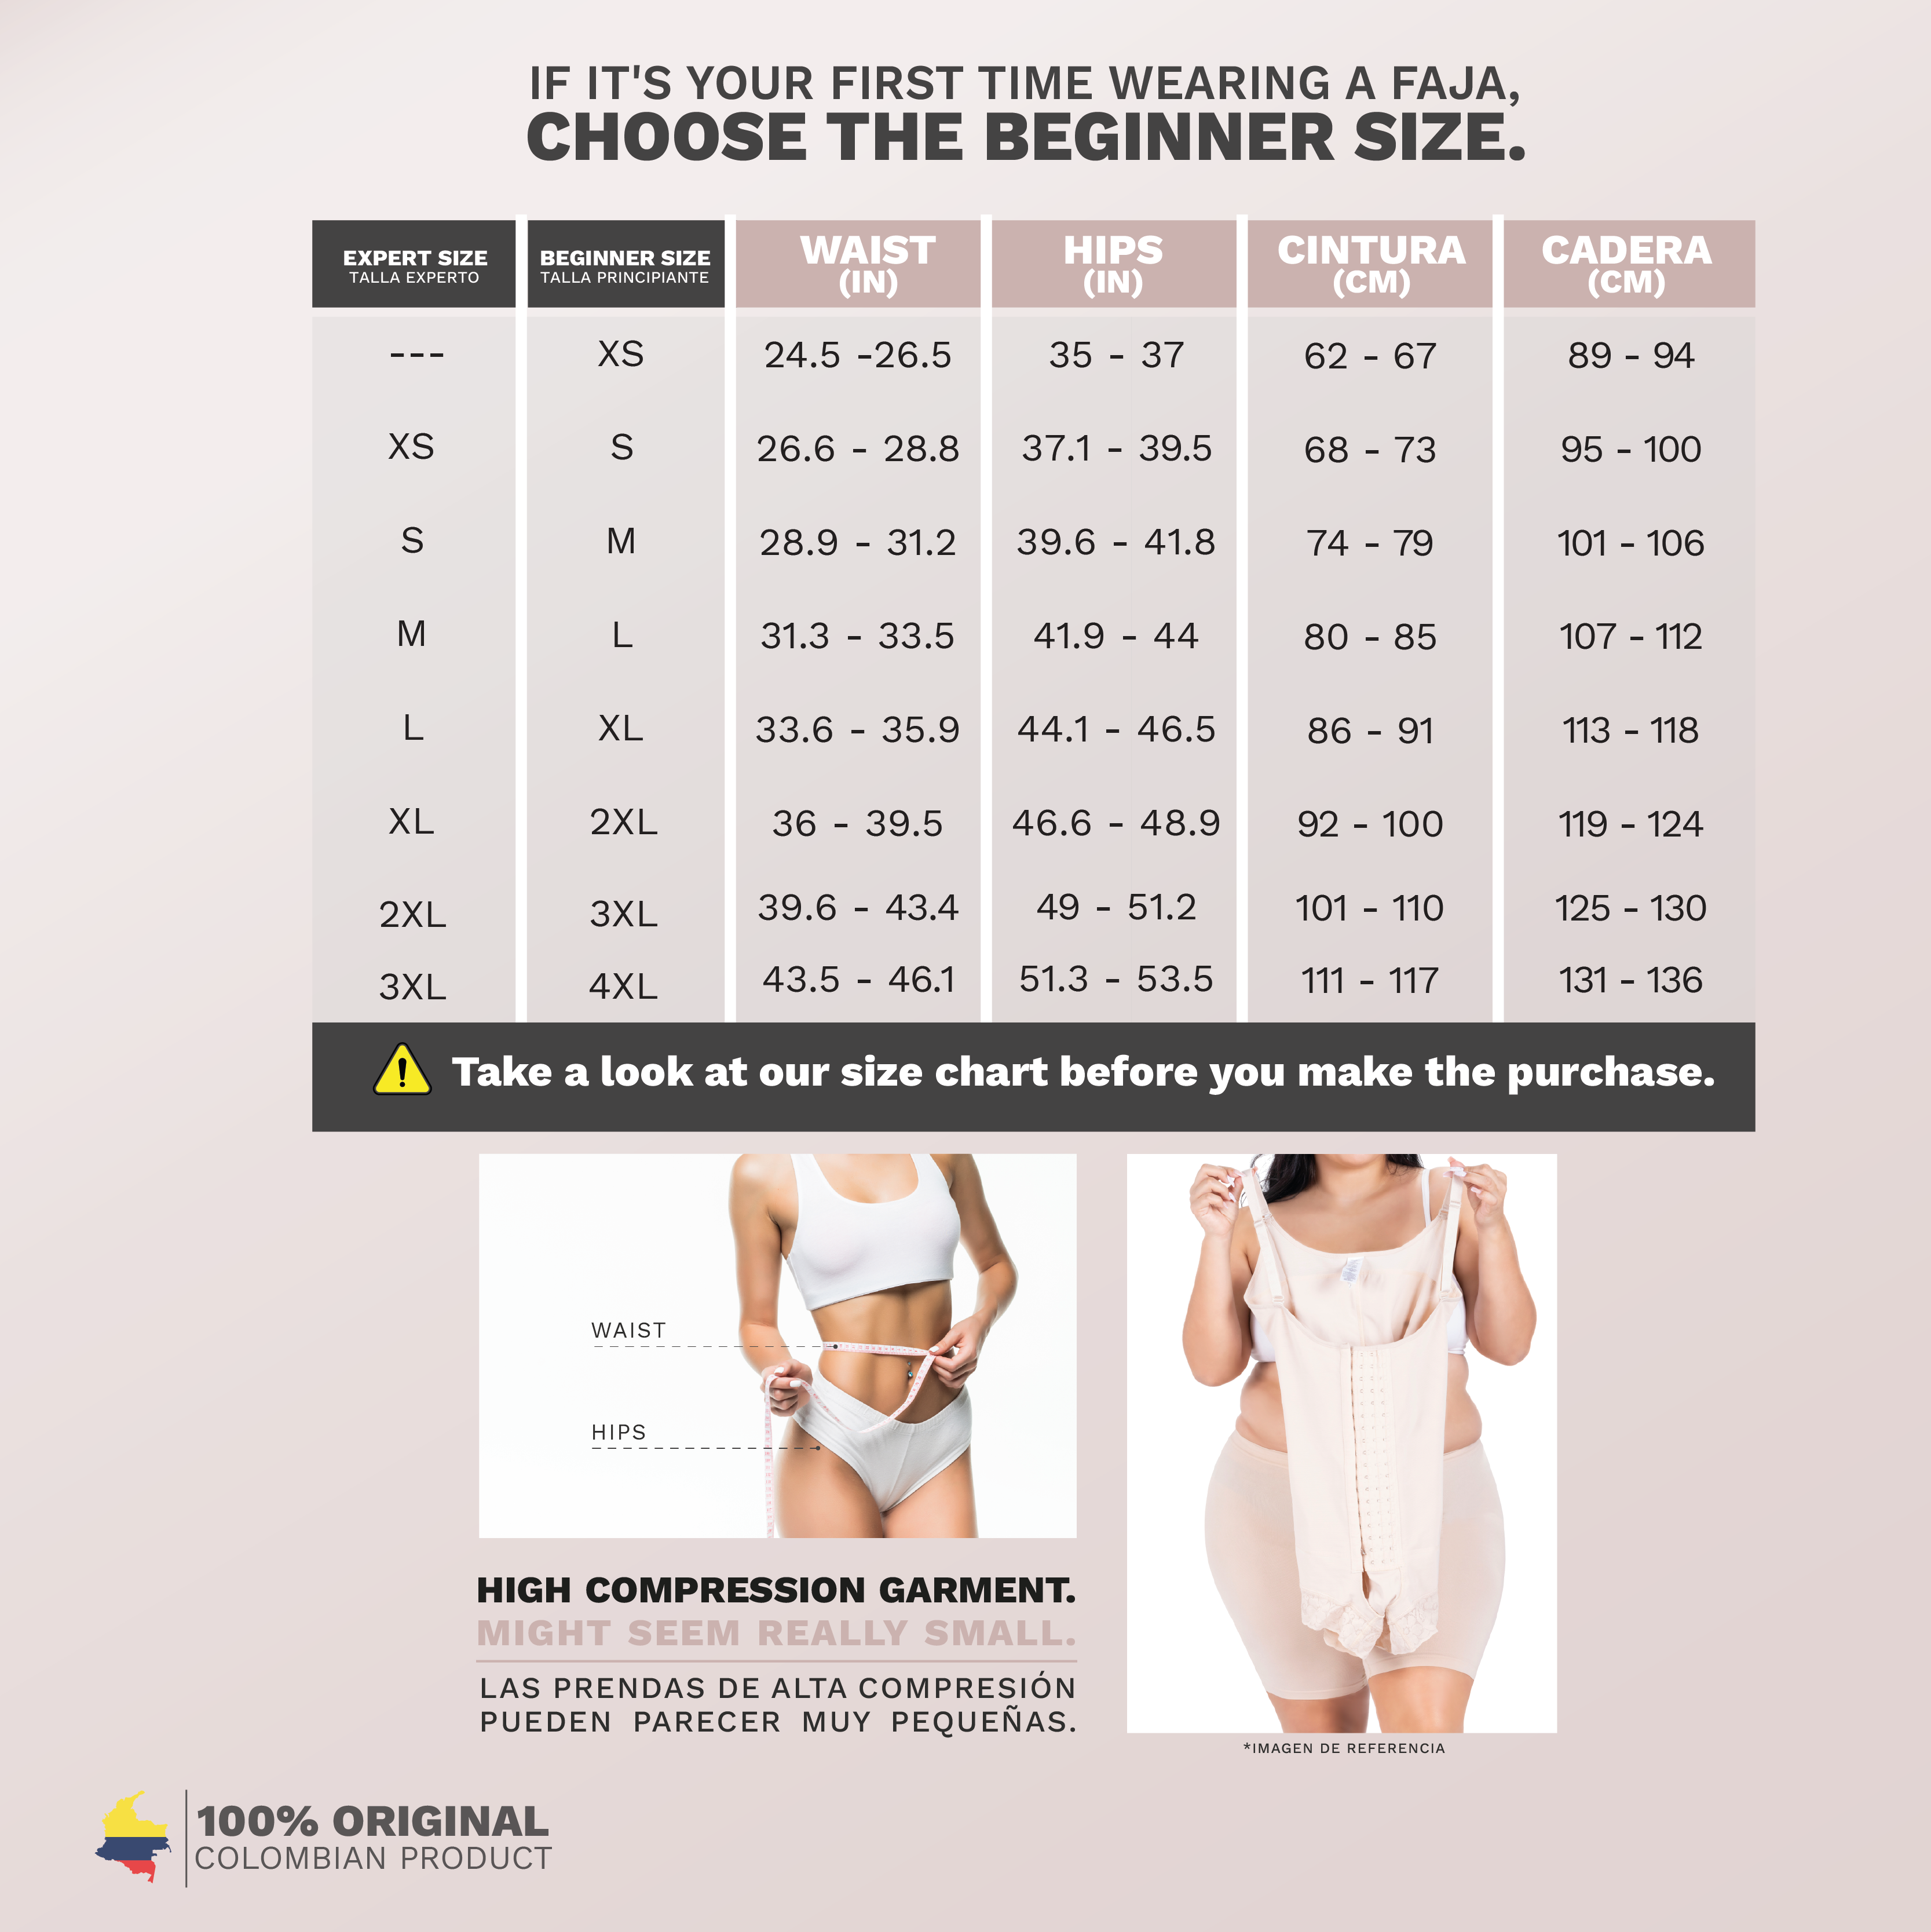 Sonryse: 046ZL - Colombian Slimming Body Shaper - Showmee Store